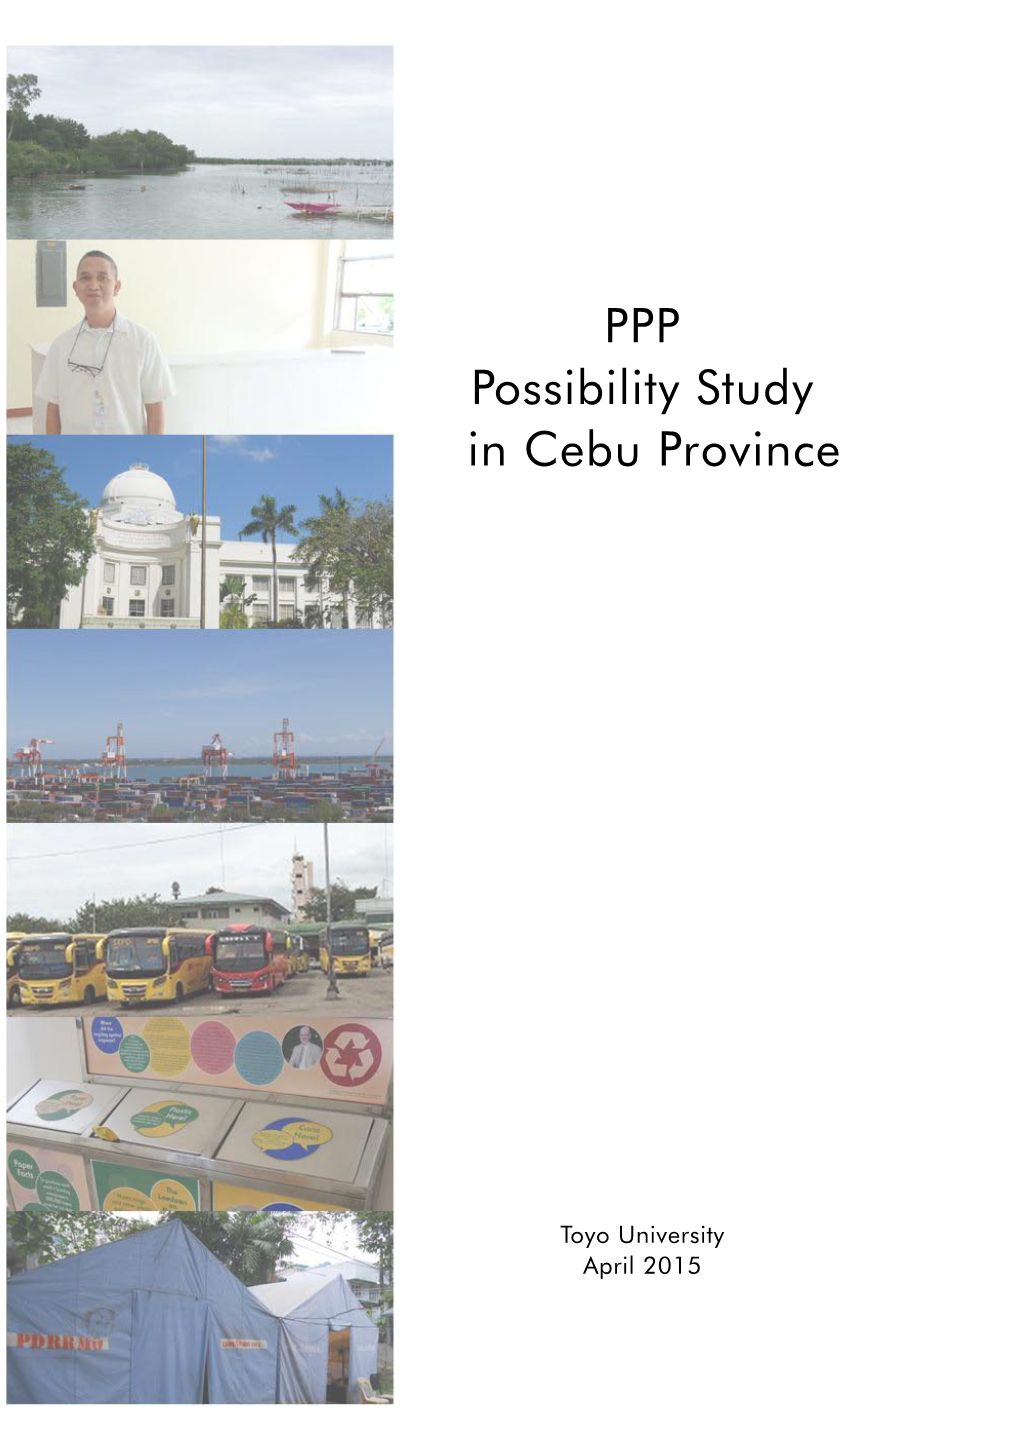 PPP Possibility Study in Cebu Province